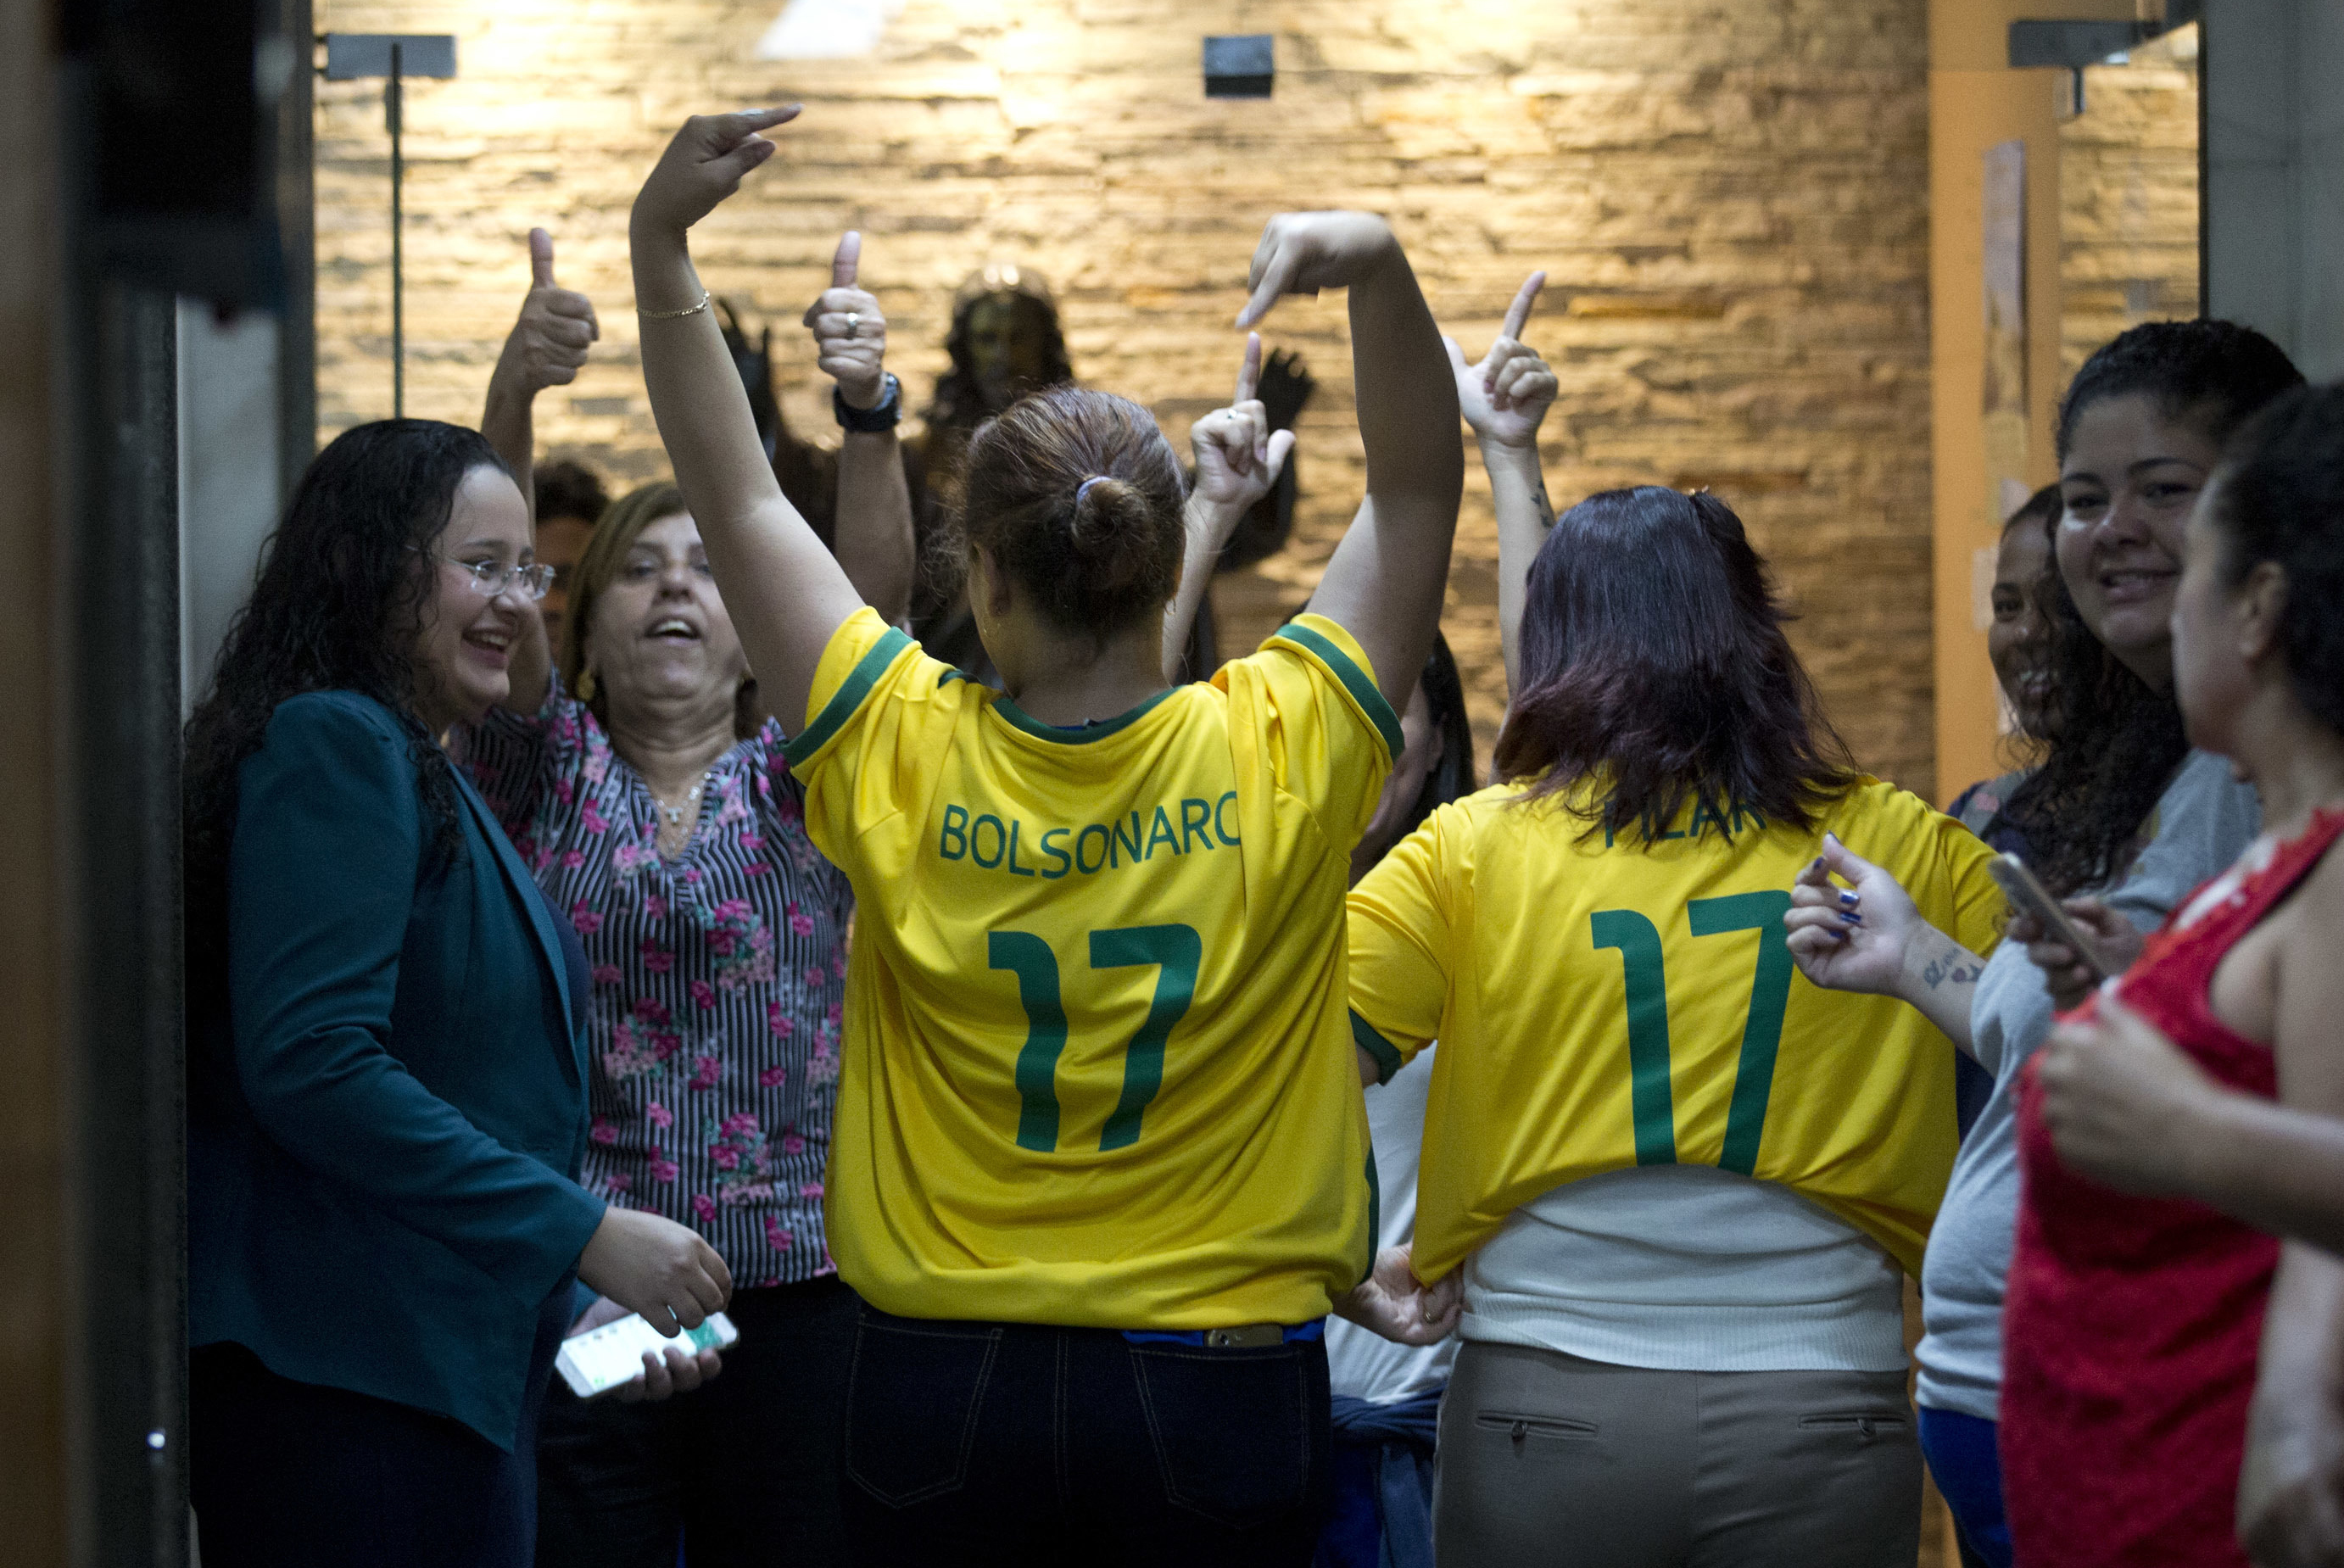 Women wear soccer jerseys featuring the name of presidential candidate Jair Bolsonaro before the candidate's meeting with Rio de Janeiro's Archbishop Dom Orani Tempesta in Rio de Janeiro, Brazil, Wednesday, Oct. 17, 2018. Bolsonaro won the first round of the presidential election Oct. 7 with 46 percent of the vote, but since he failed to top 50 percent, he is in a second-round ballot on Oct. 28. (AP Photo/Silvia Izquierdo)